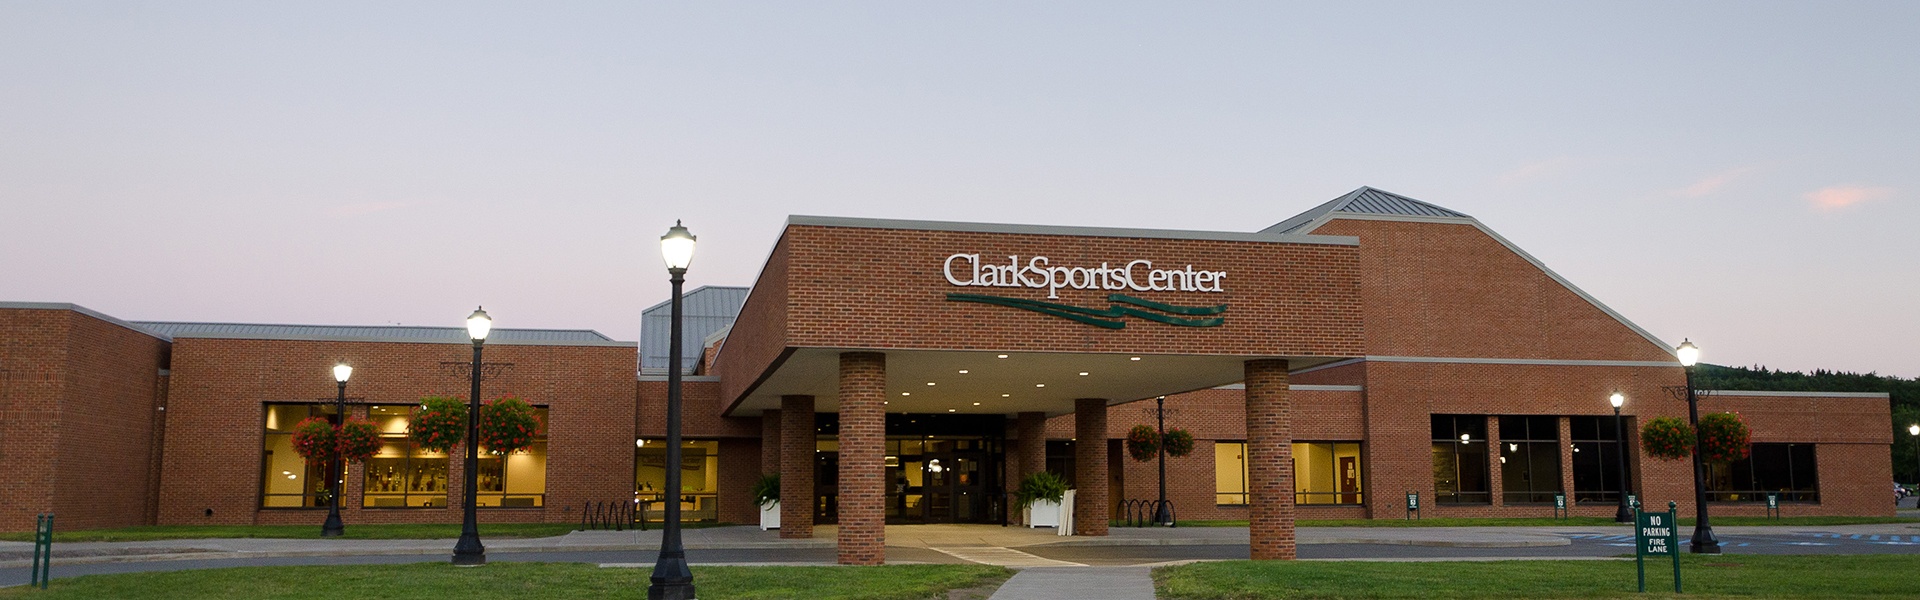 Online Reservations The Clark Sports Center